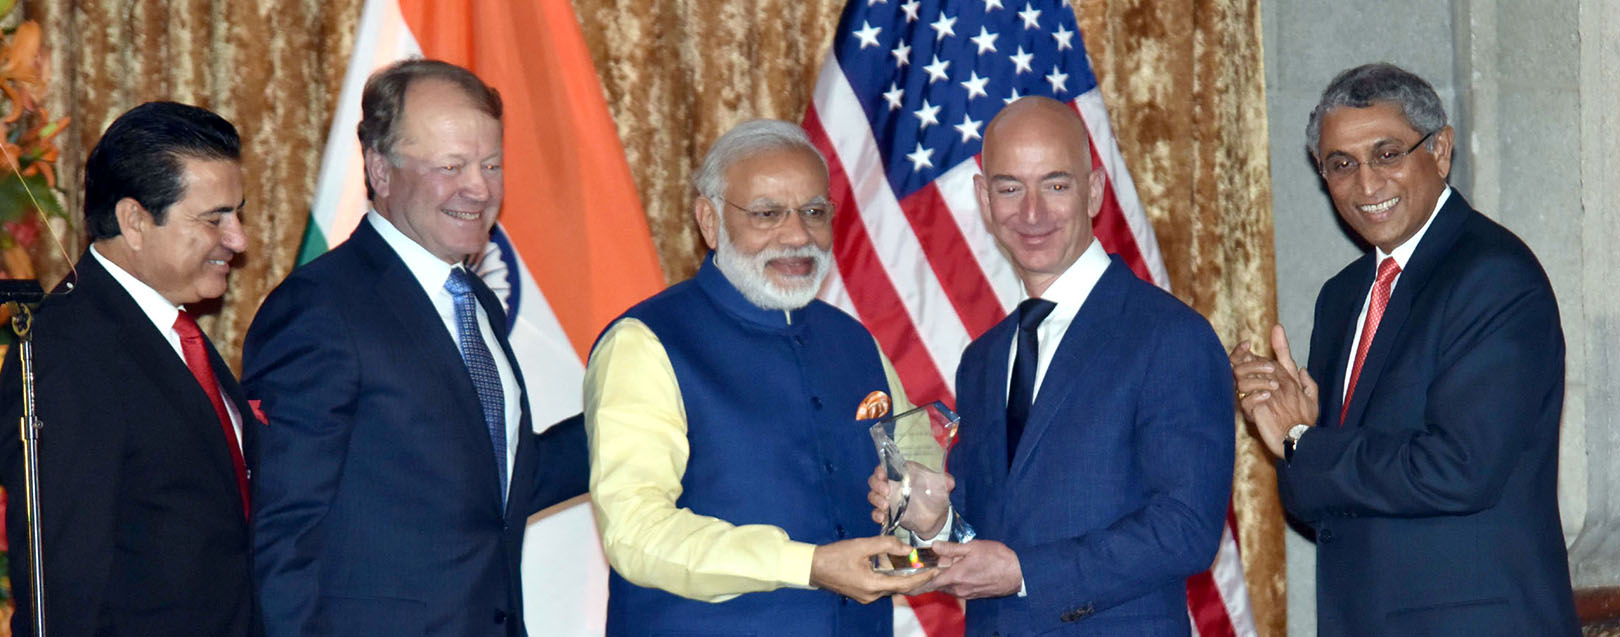 Amazon to invest additional $3 billion in India